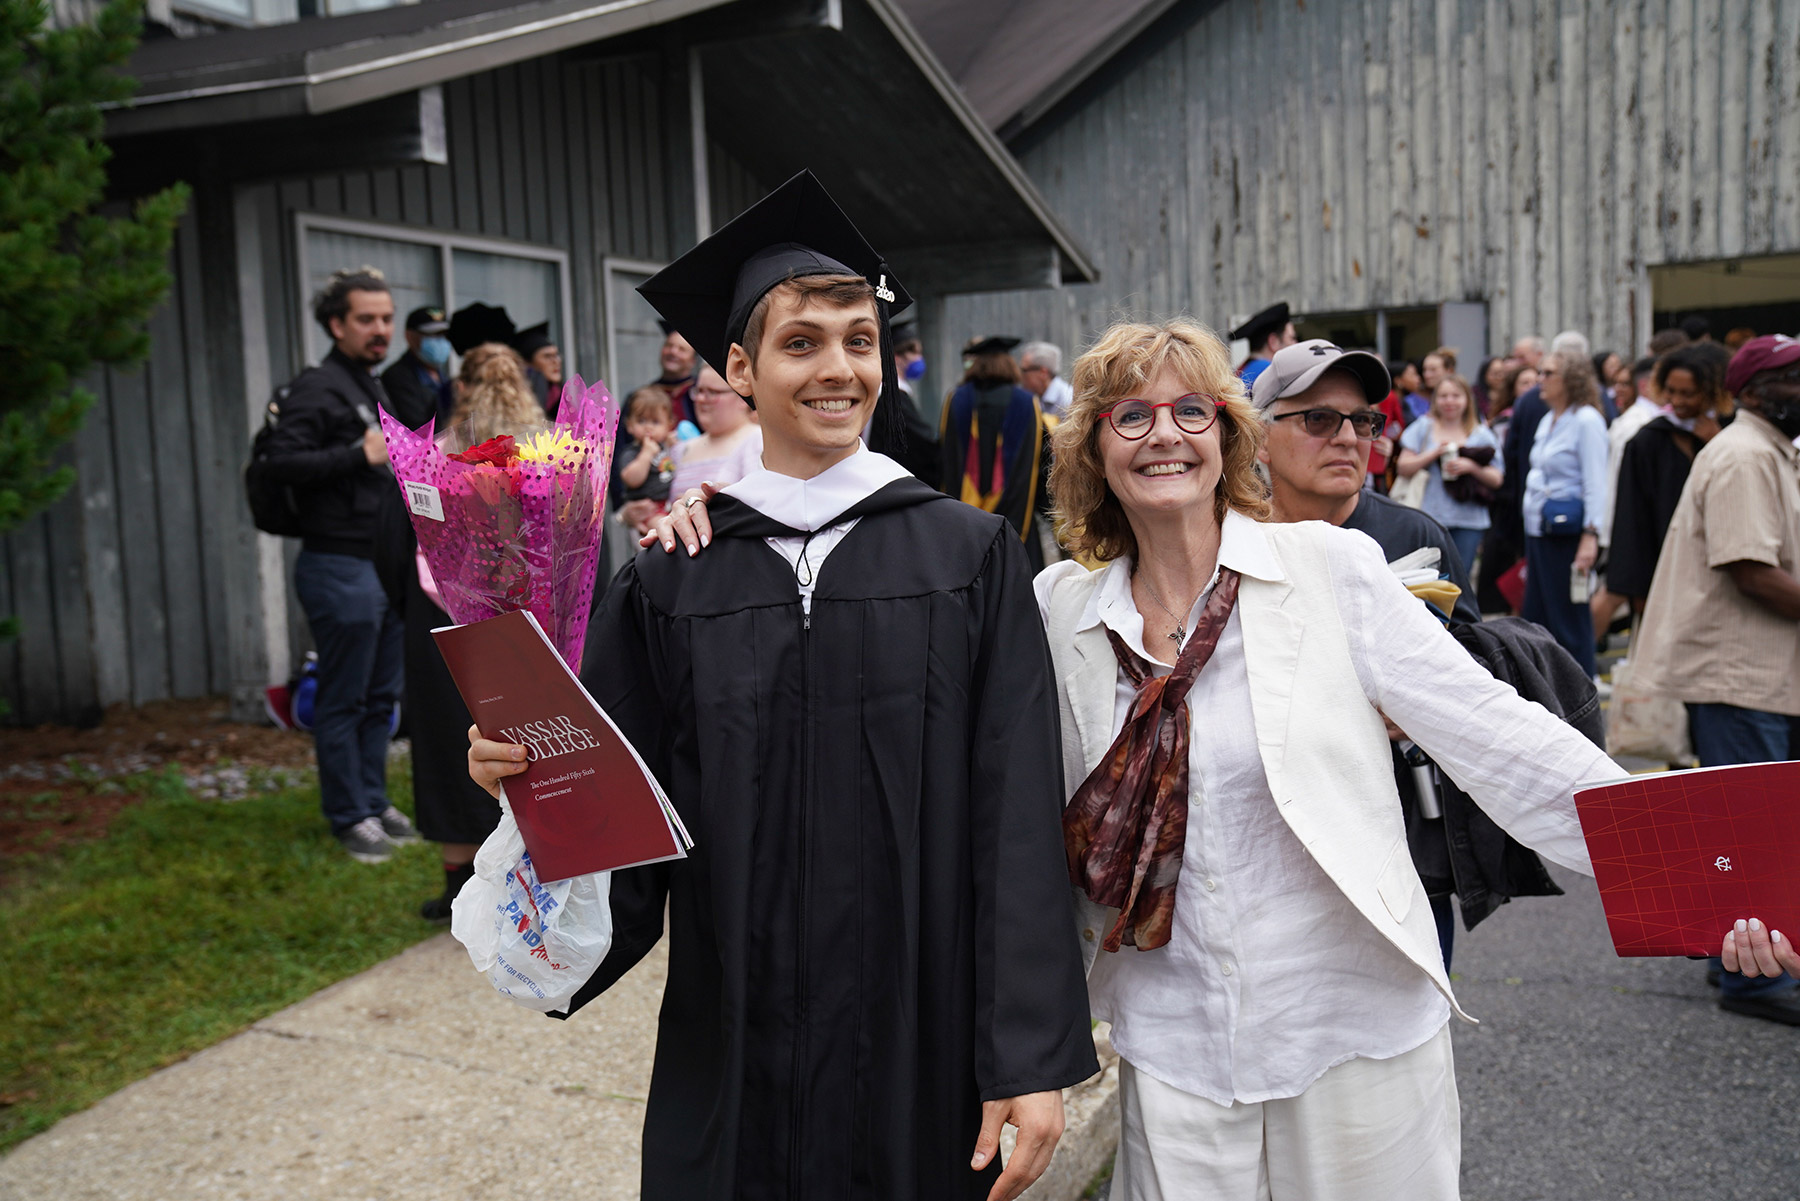 A mother celebrates her graduate after the ceremony.